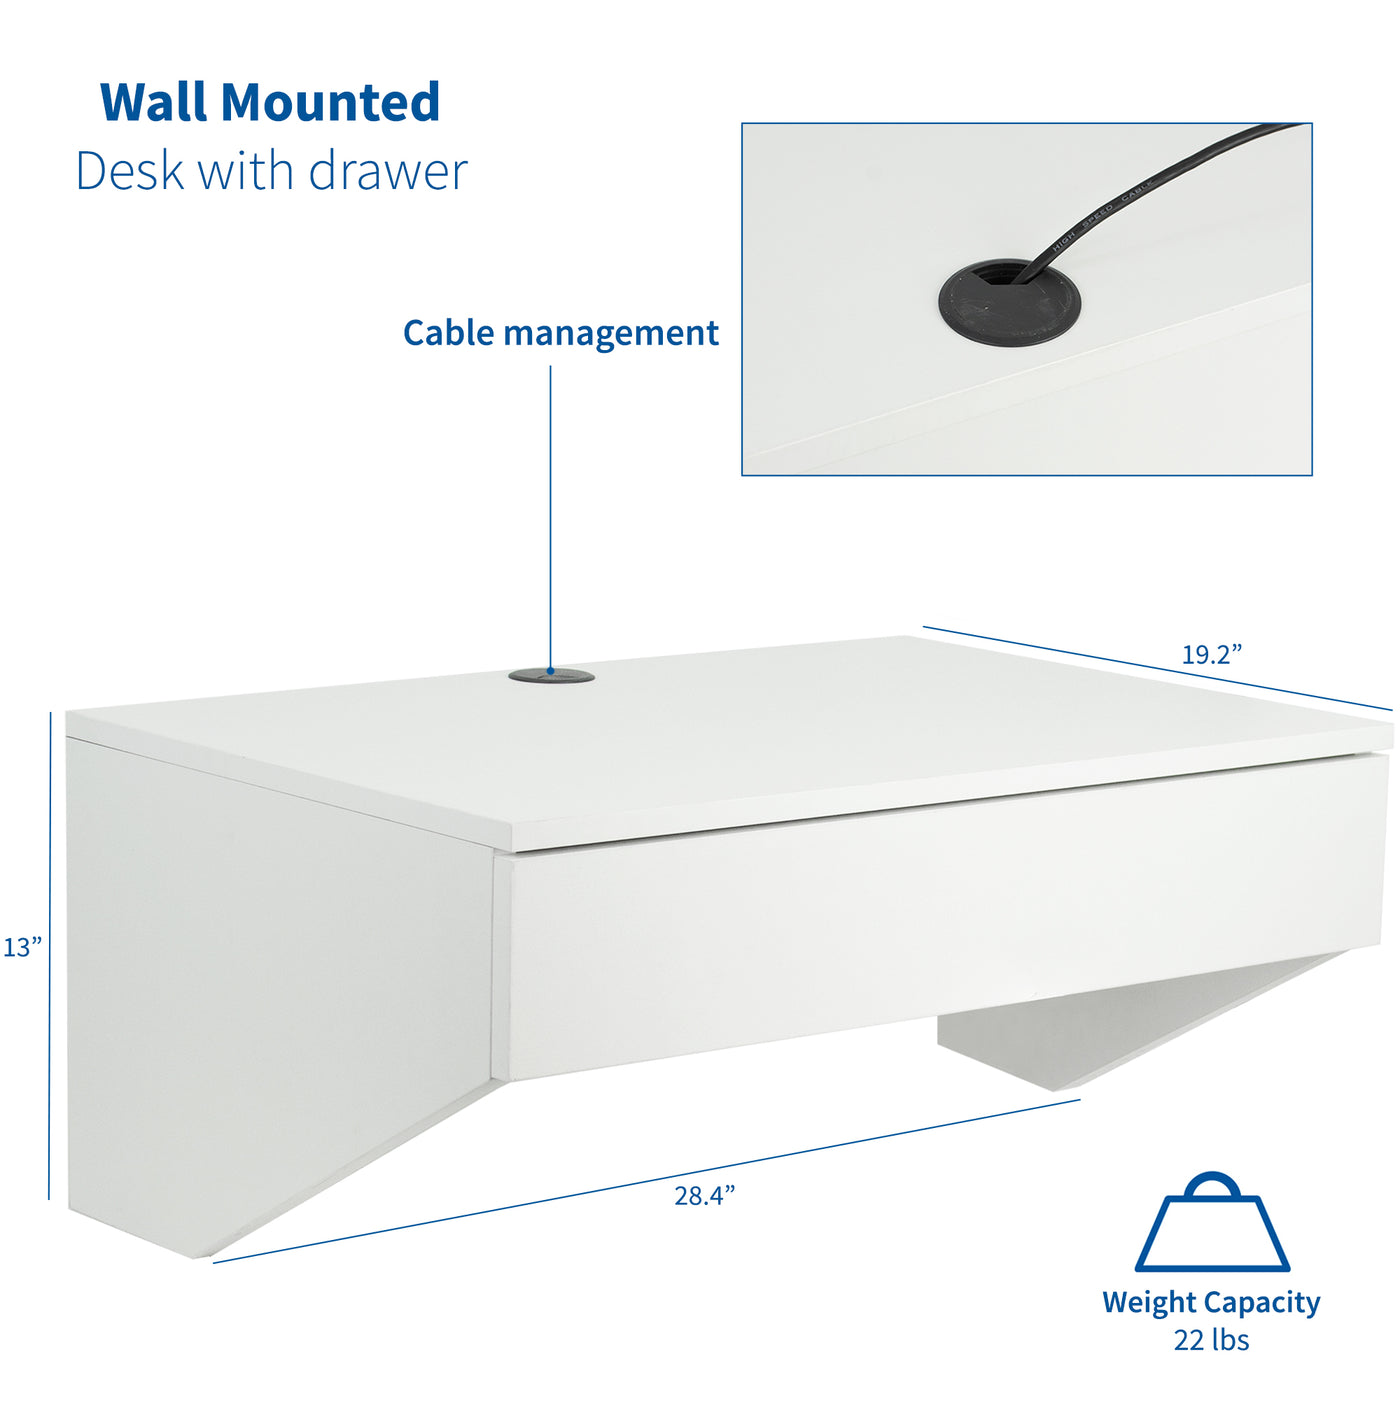 Sturdy wall mount desk with drawer with cable management.